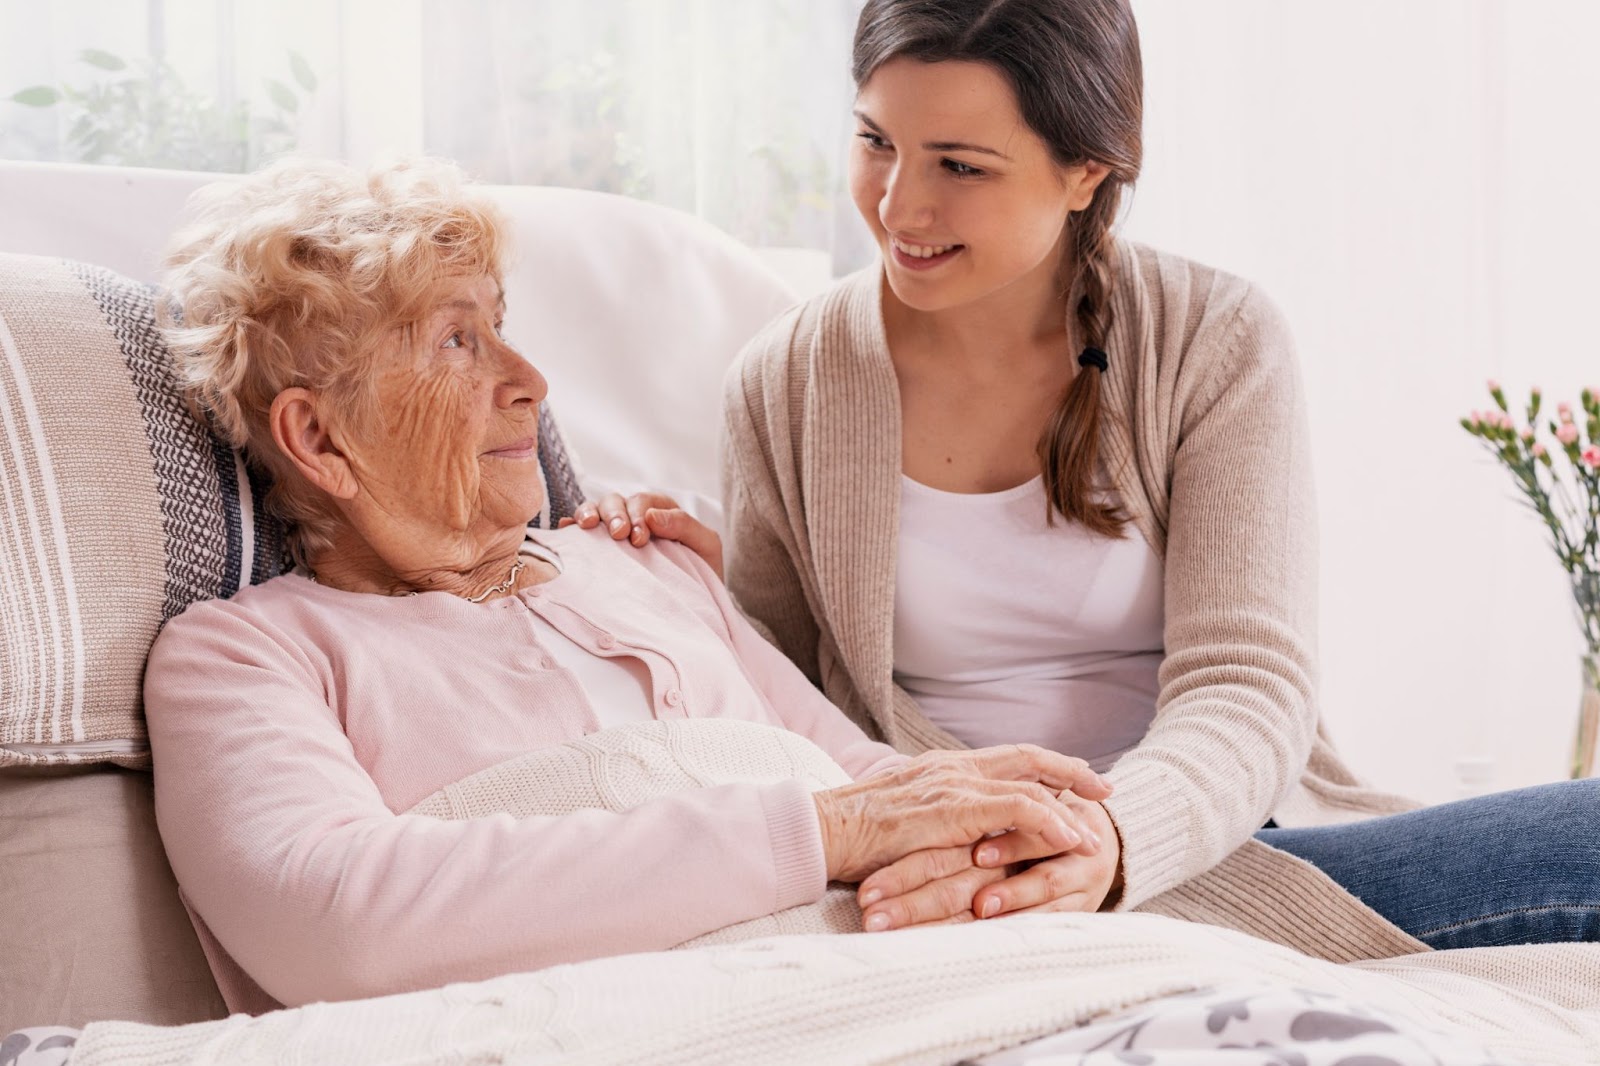 A caregiver gently supports a frail elderly woman who is lying in a hospital bed, offering comfort and assistance.